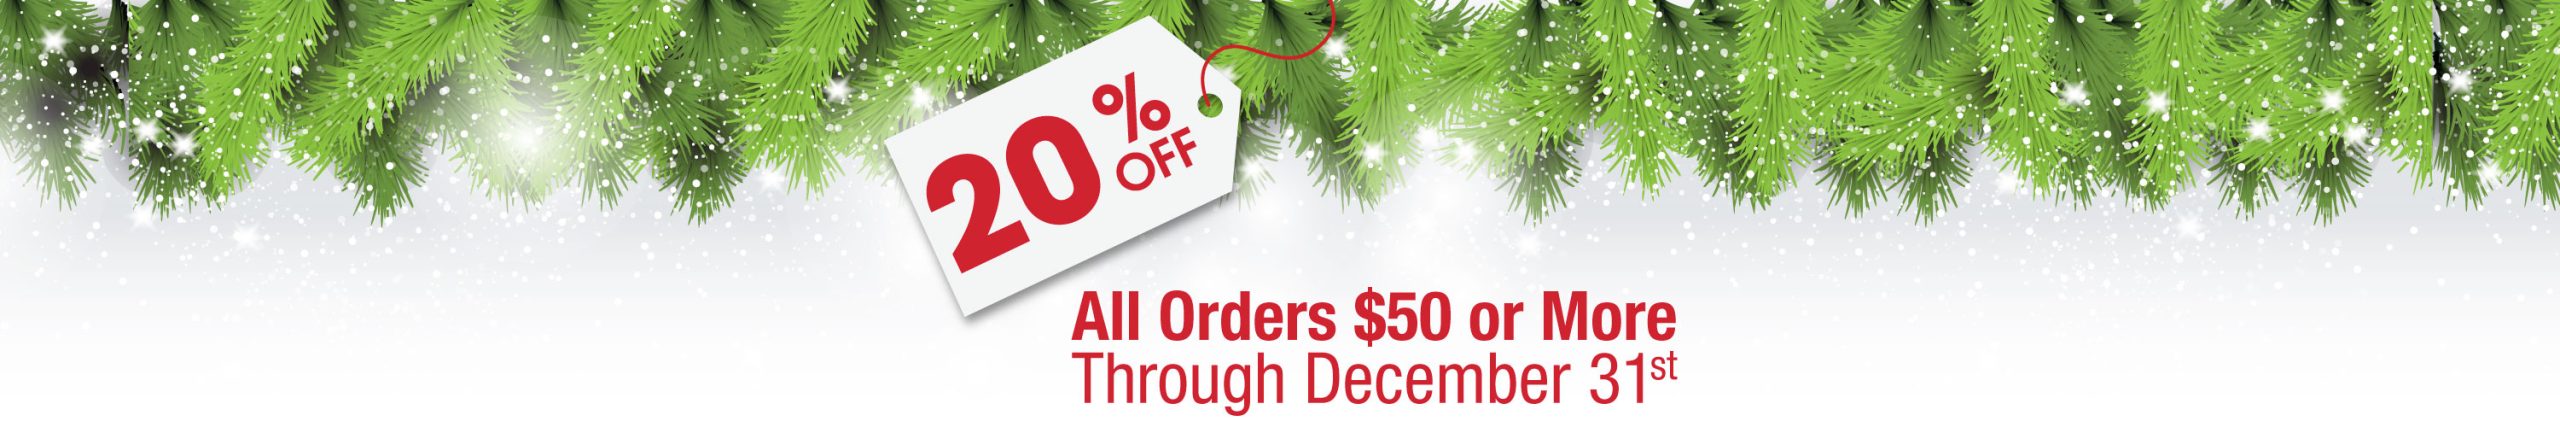 20% OFF All Orders $50 or More Through December 31st!